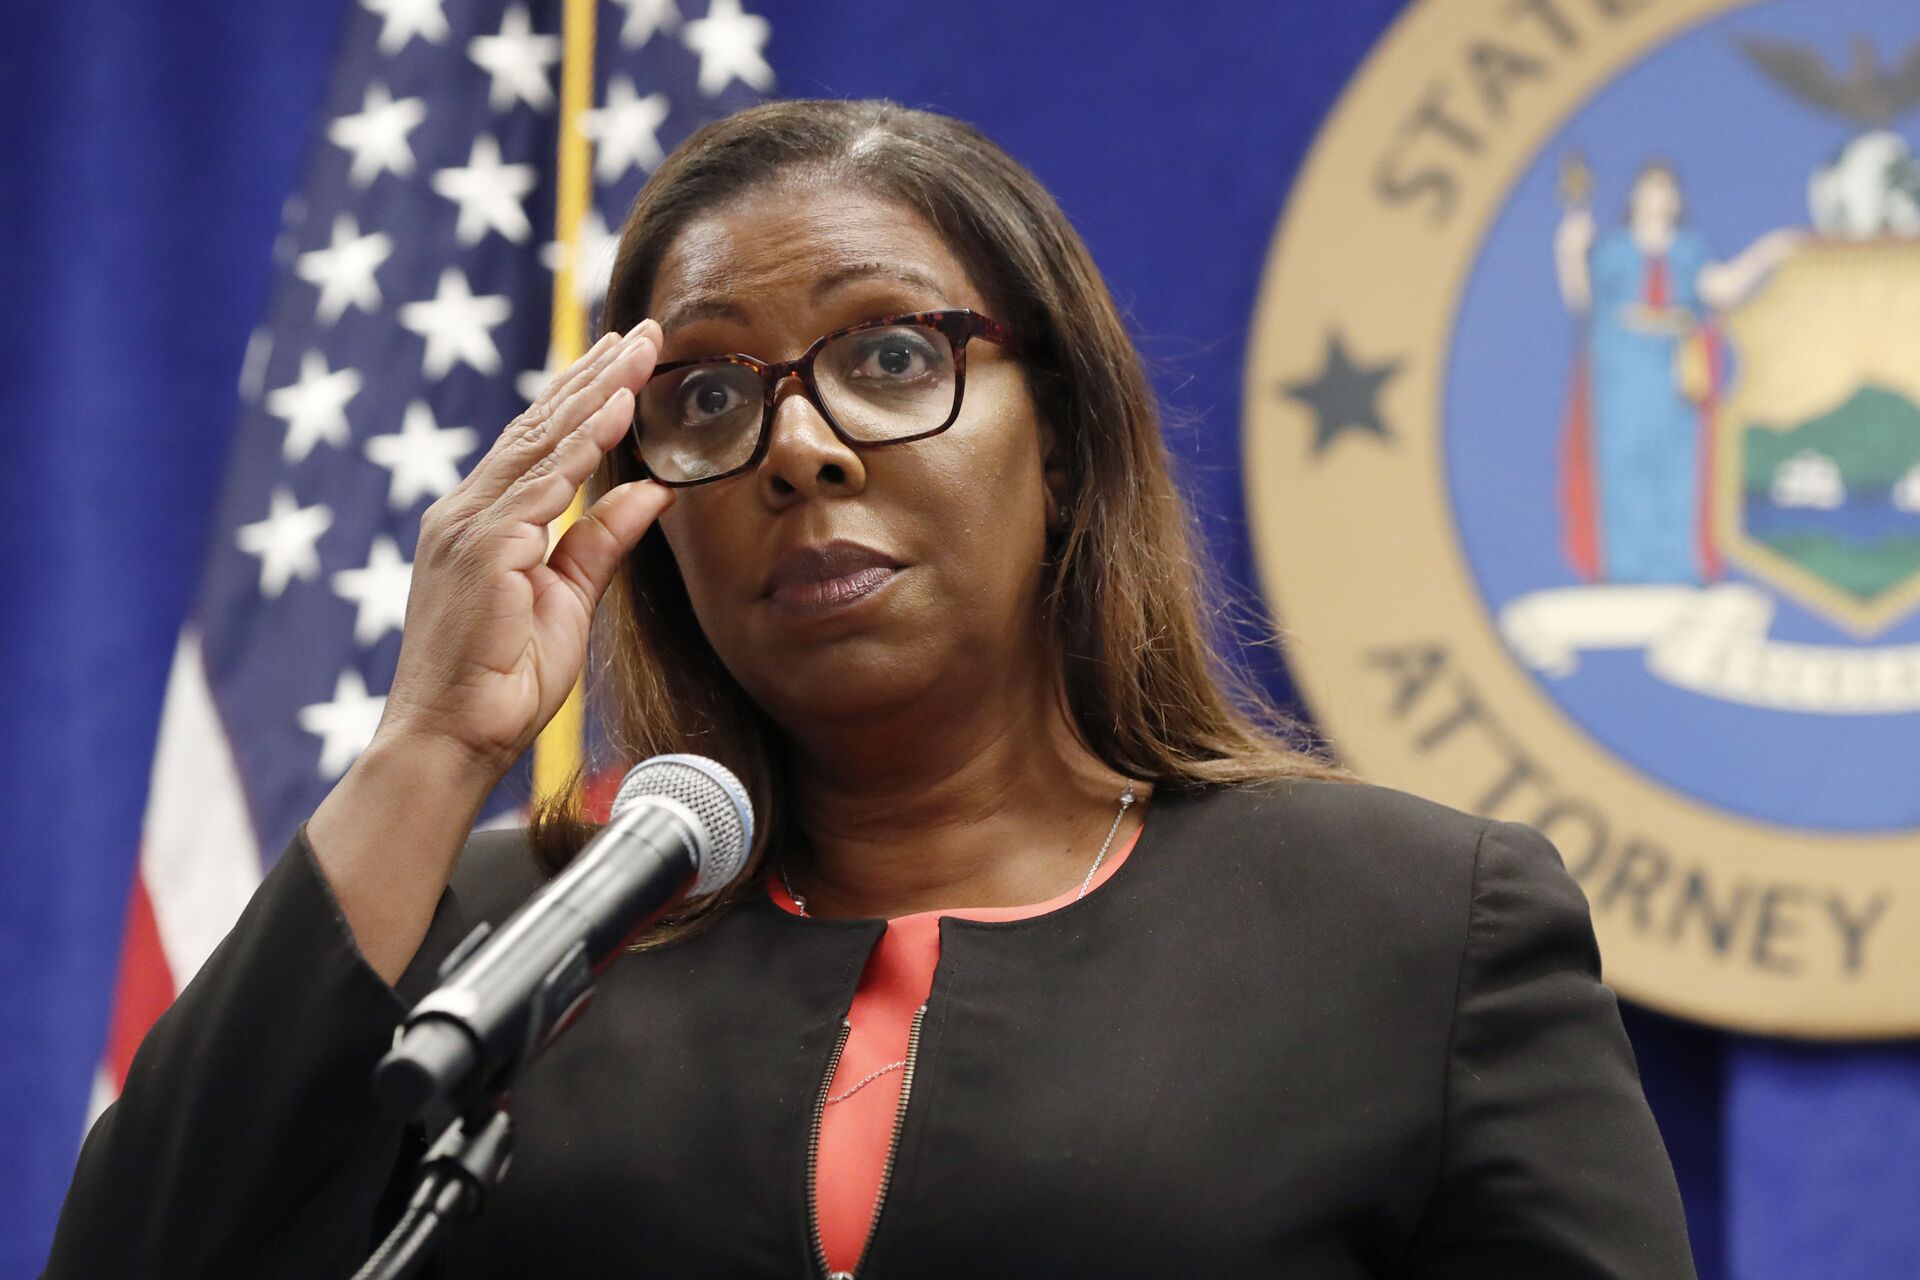 New York State Attorney General Letitia James adjusts her glasses as she announces that the state is suing the National Rifle Association during a press conference, Thursday, Aug. 6, 2020, in New York. James said that the state is seeking to put the powerful gun advocacy organization out of business over allegations that high-ranking executives diverted millions of dollars for lavish personal trips, no-show contracts for associates and other questionable expenditures. (AP Photo/Kathy Willens) - Sputnik International, 1920, 07.09.2021